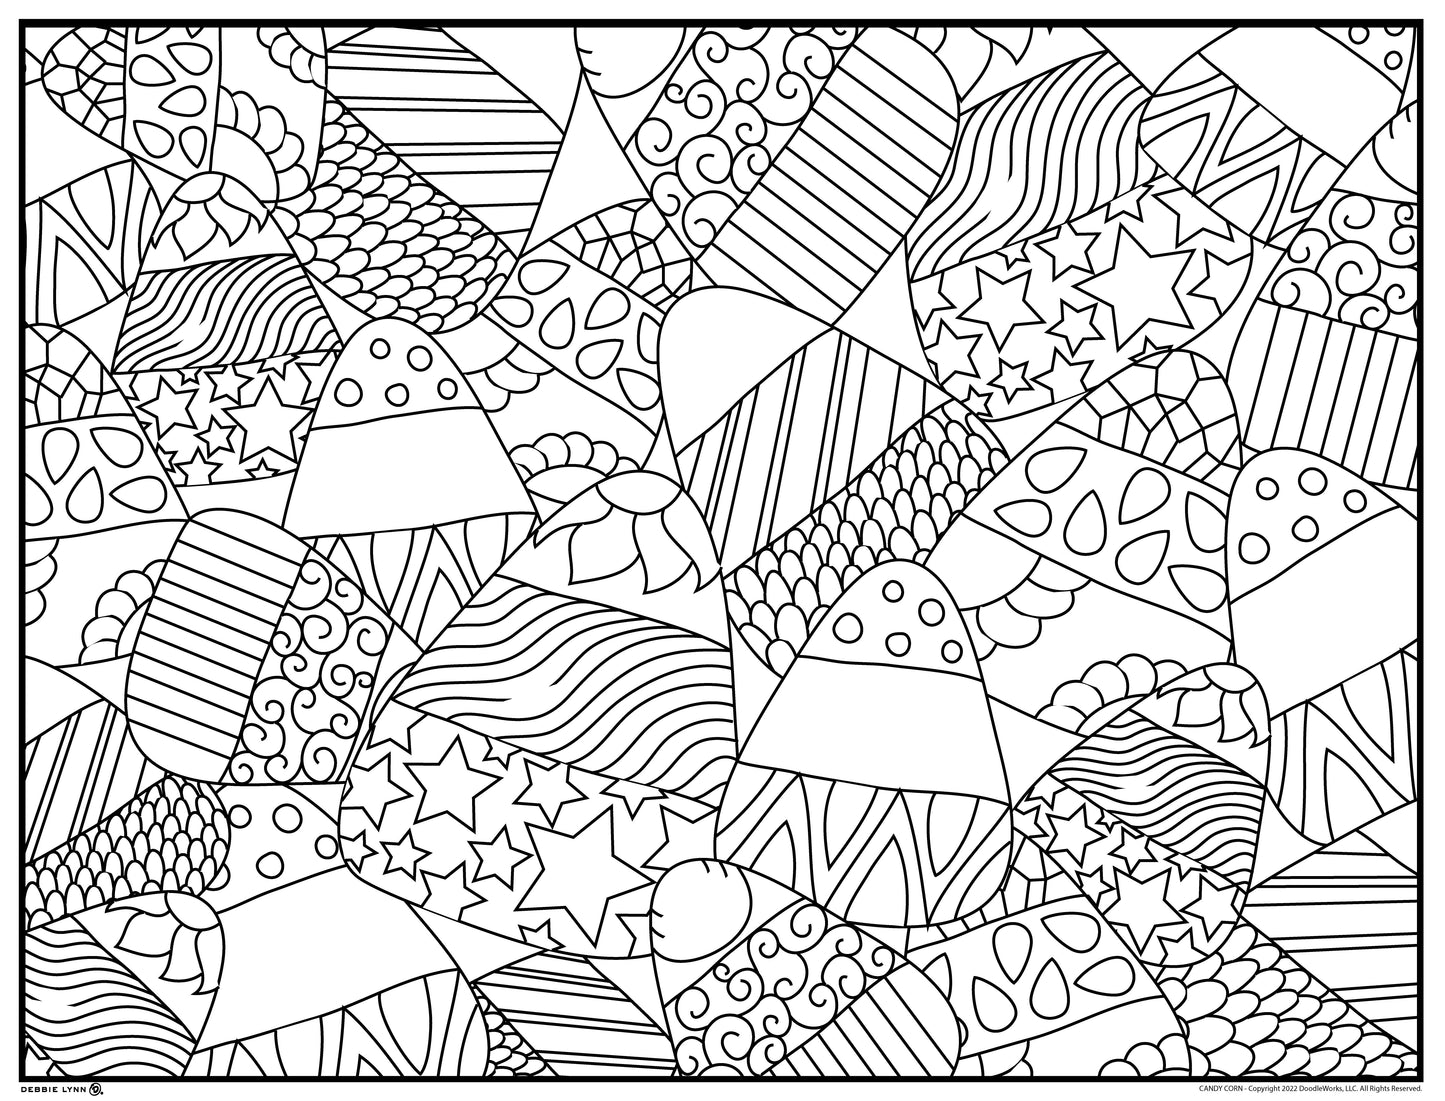 Candy Corn Personalized Giant Coloring Poster 46"x60"